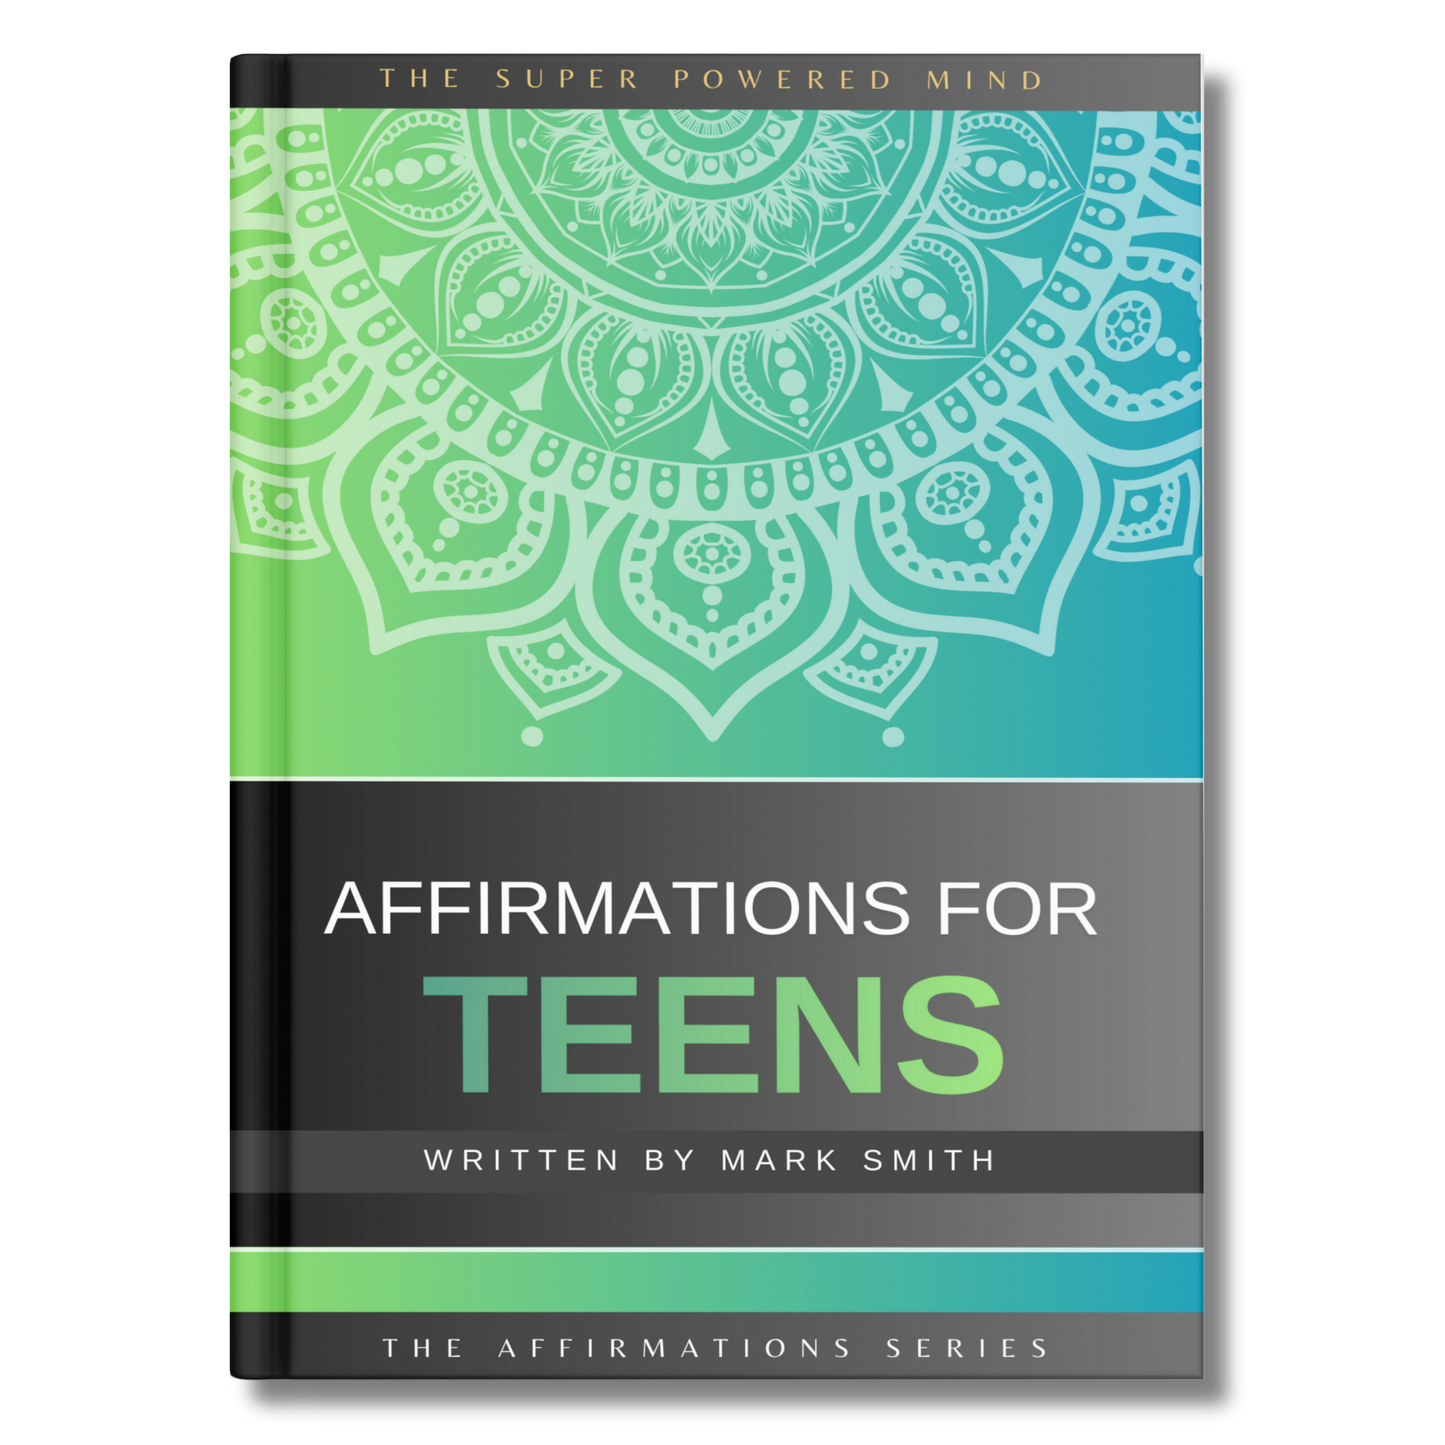 The Affirmations Series 8 Book Bundle - Written by Mark Smith (Digital Download eBook)